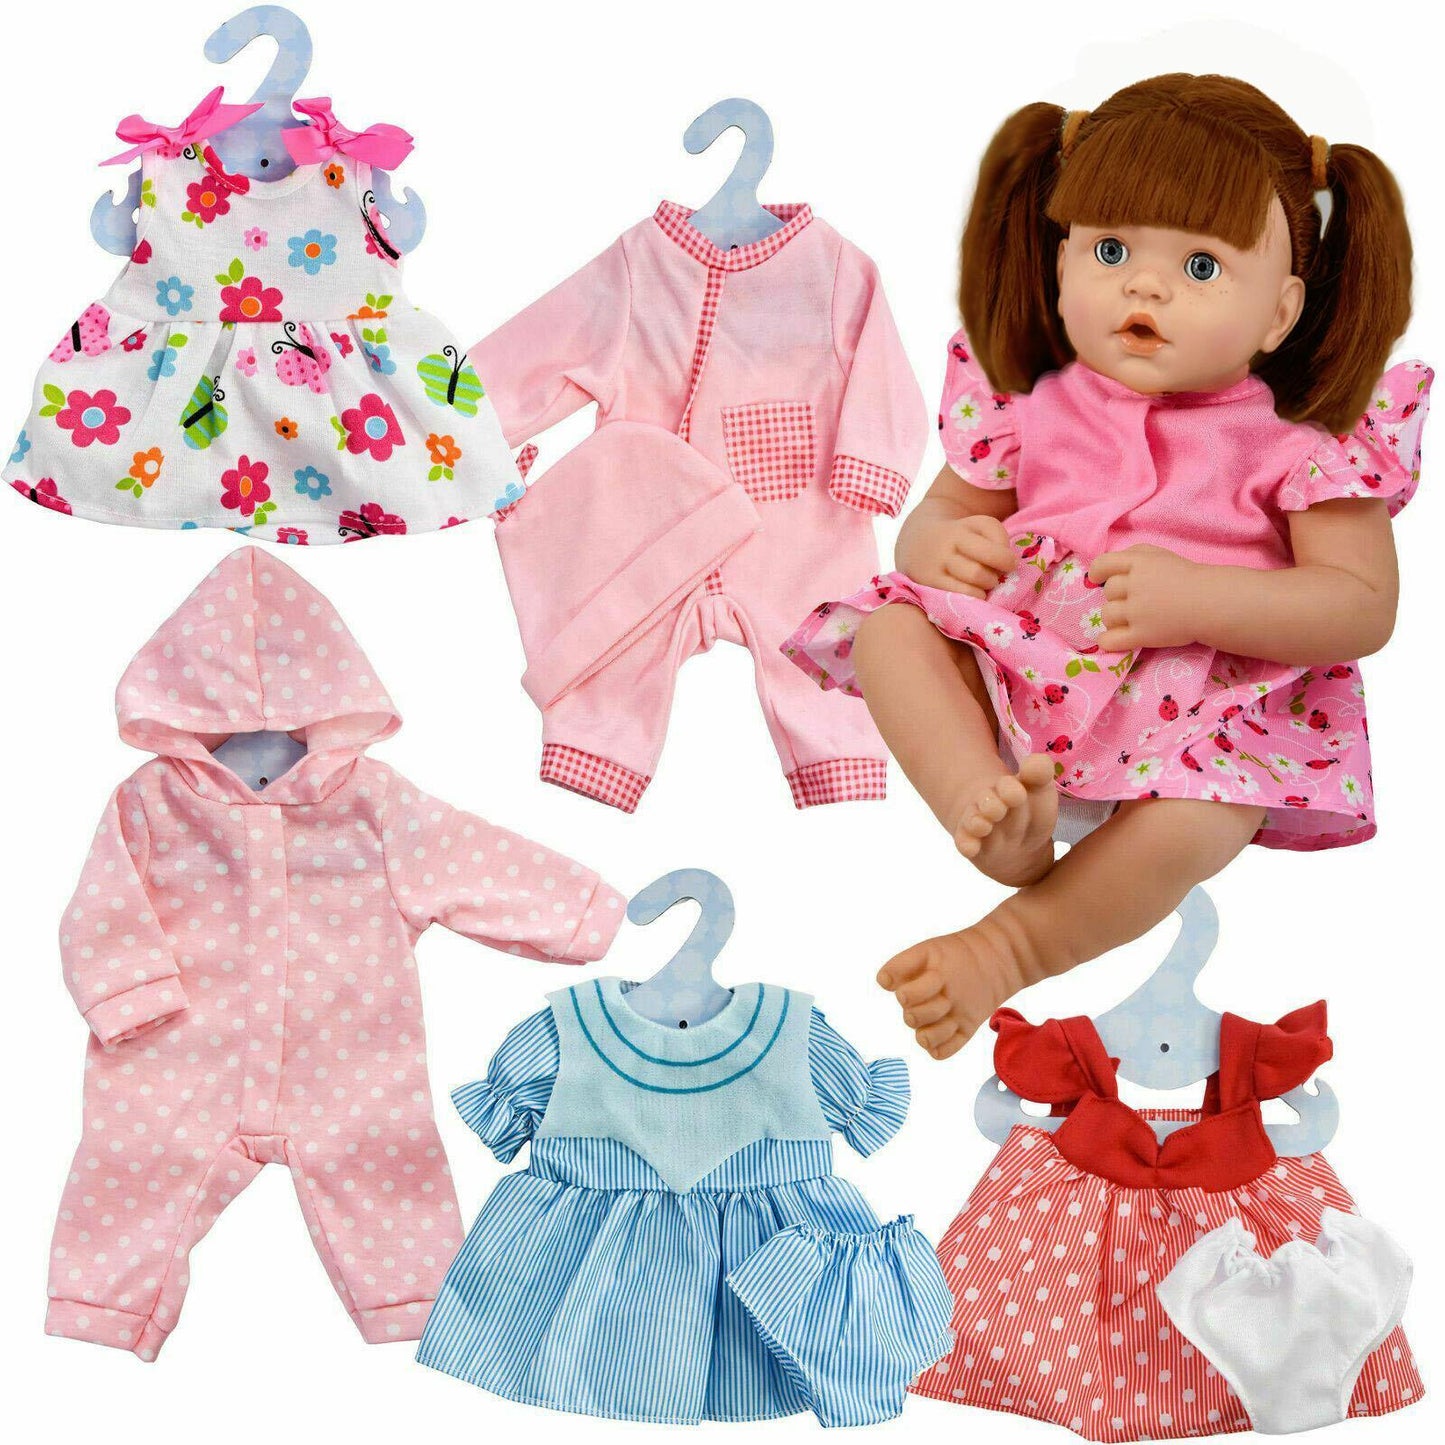 Baby Doll Clothes Set of 6 for Dolls 12-16" by BiBi Doll - UKBuyZone